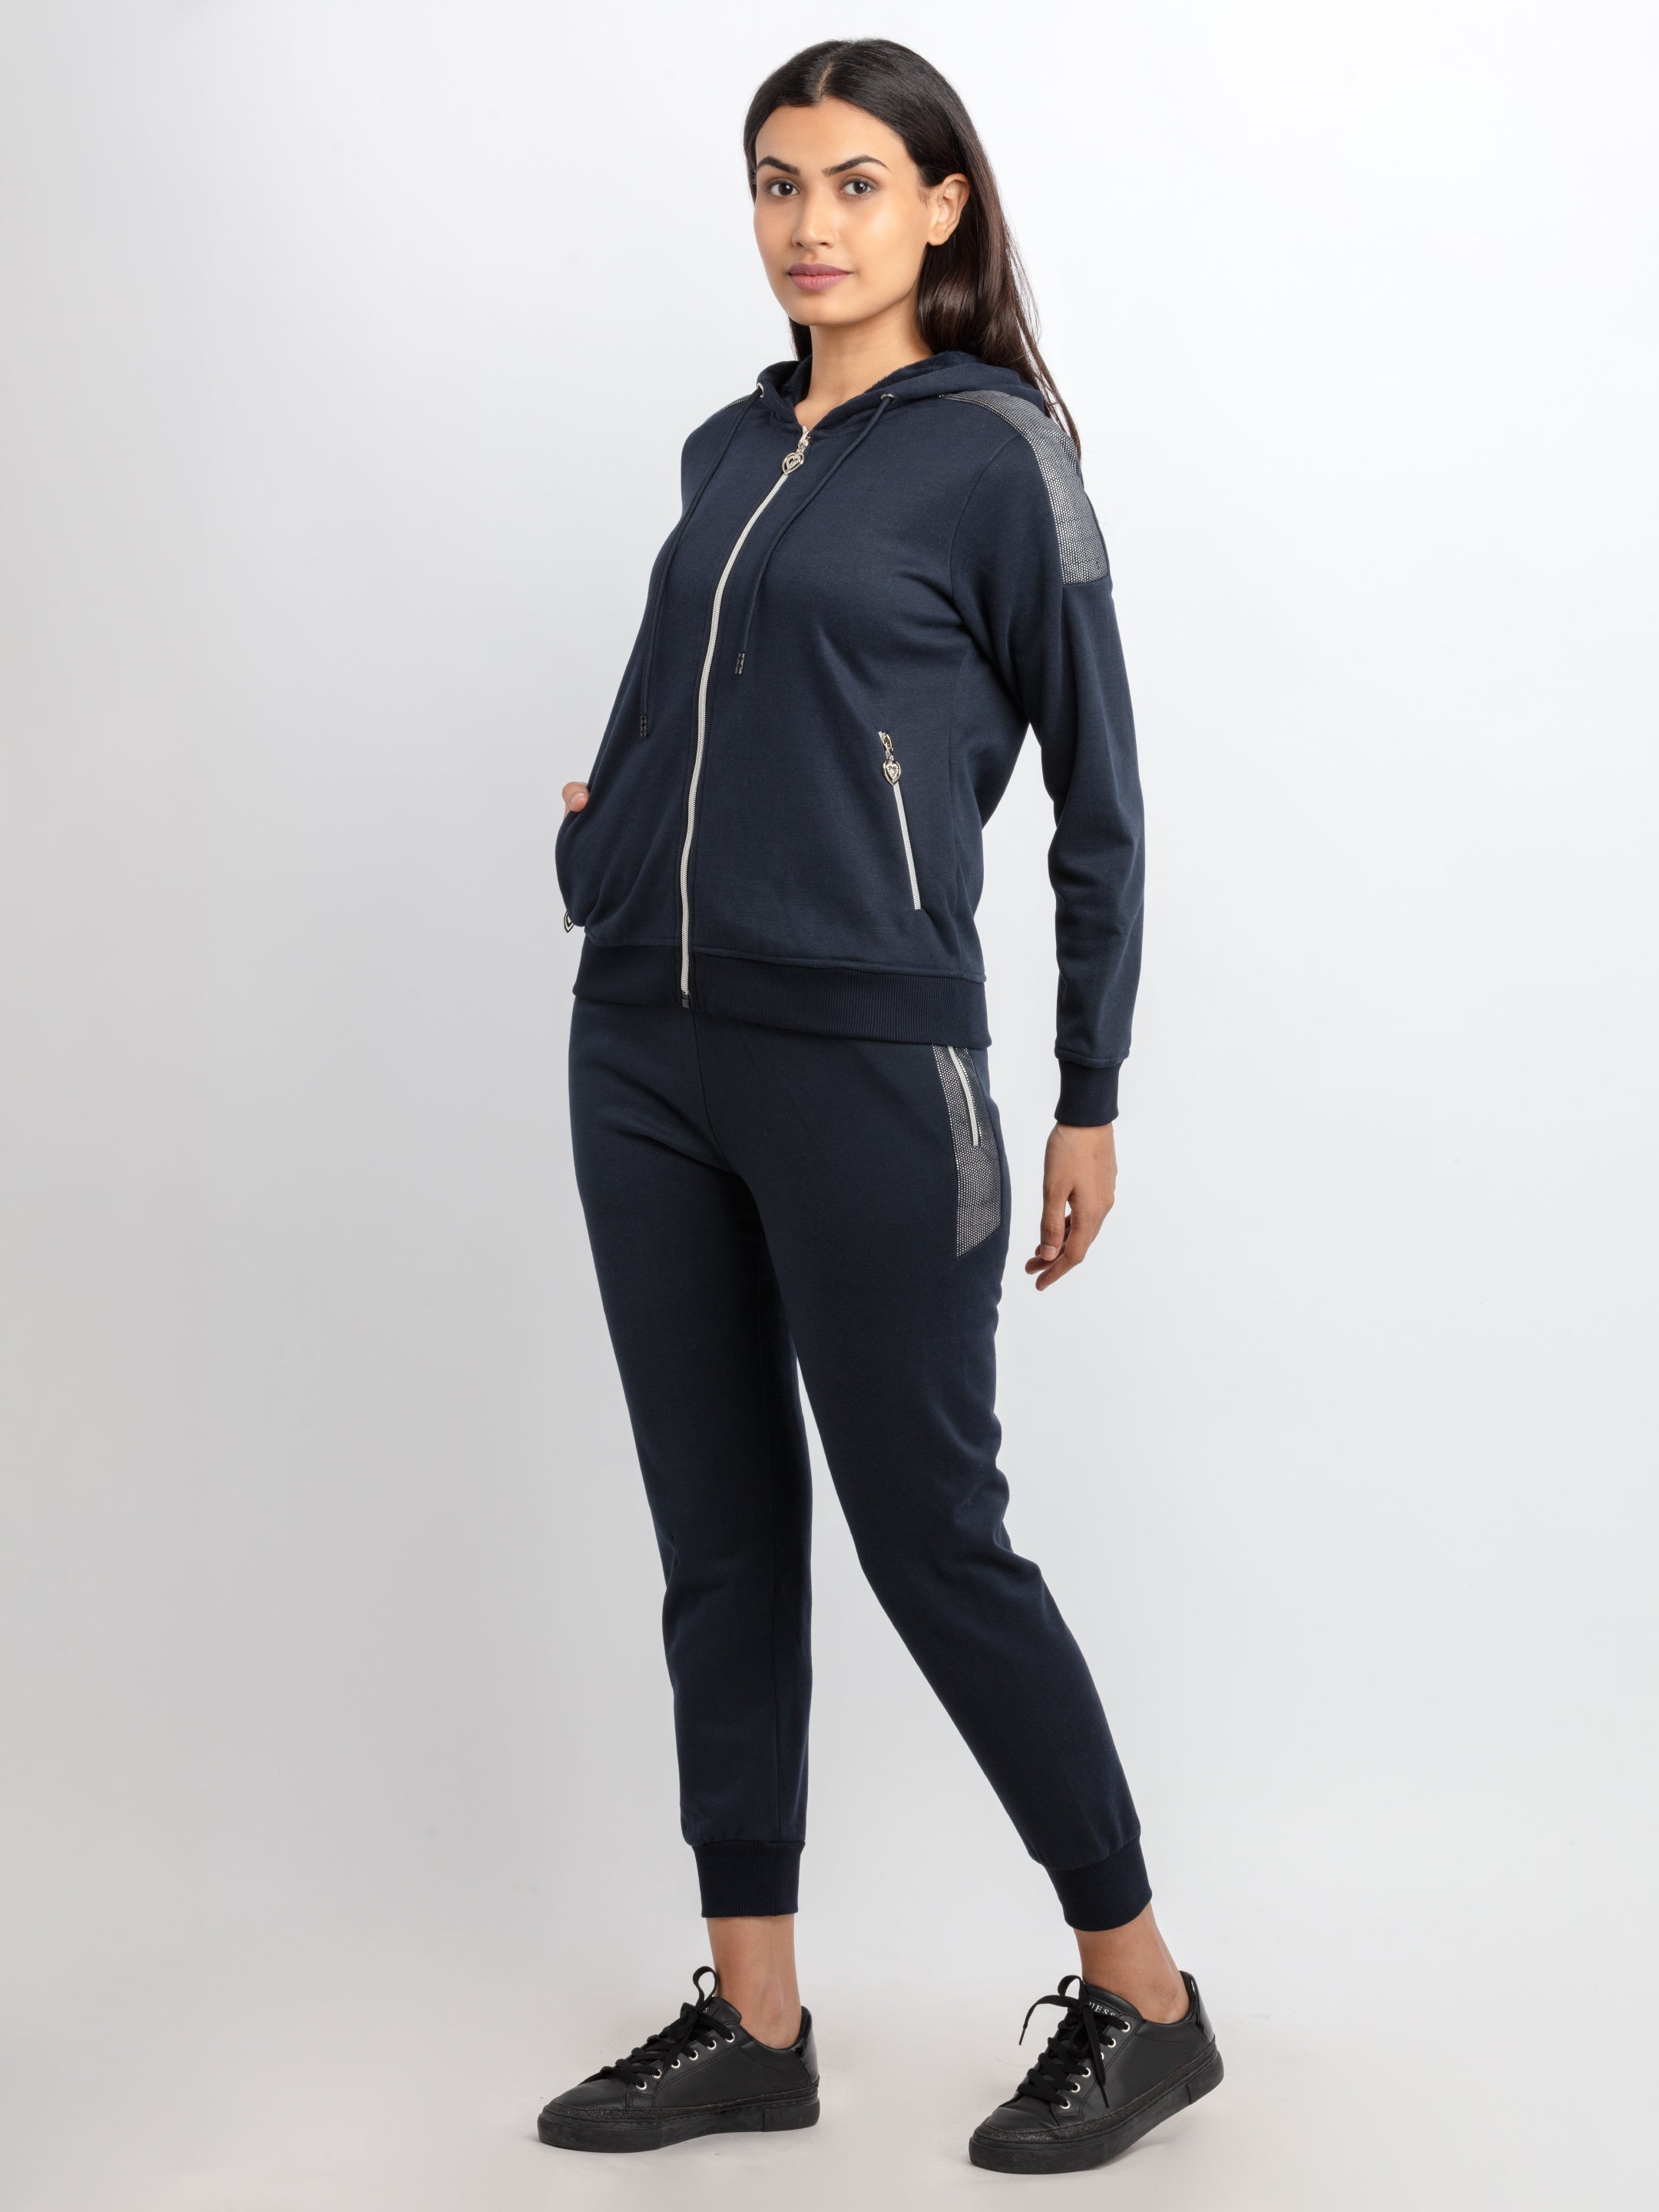 Womens Solid Zipper Tracksuit - S / Navy / SQW-TRACKSUIT-22890-Navy